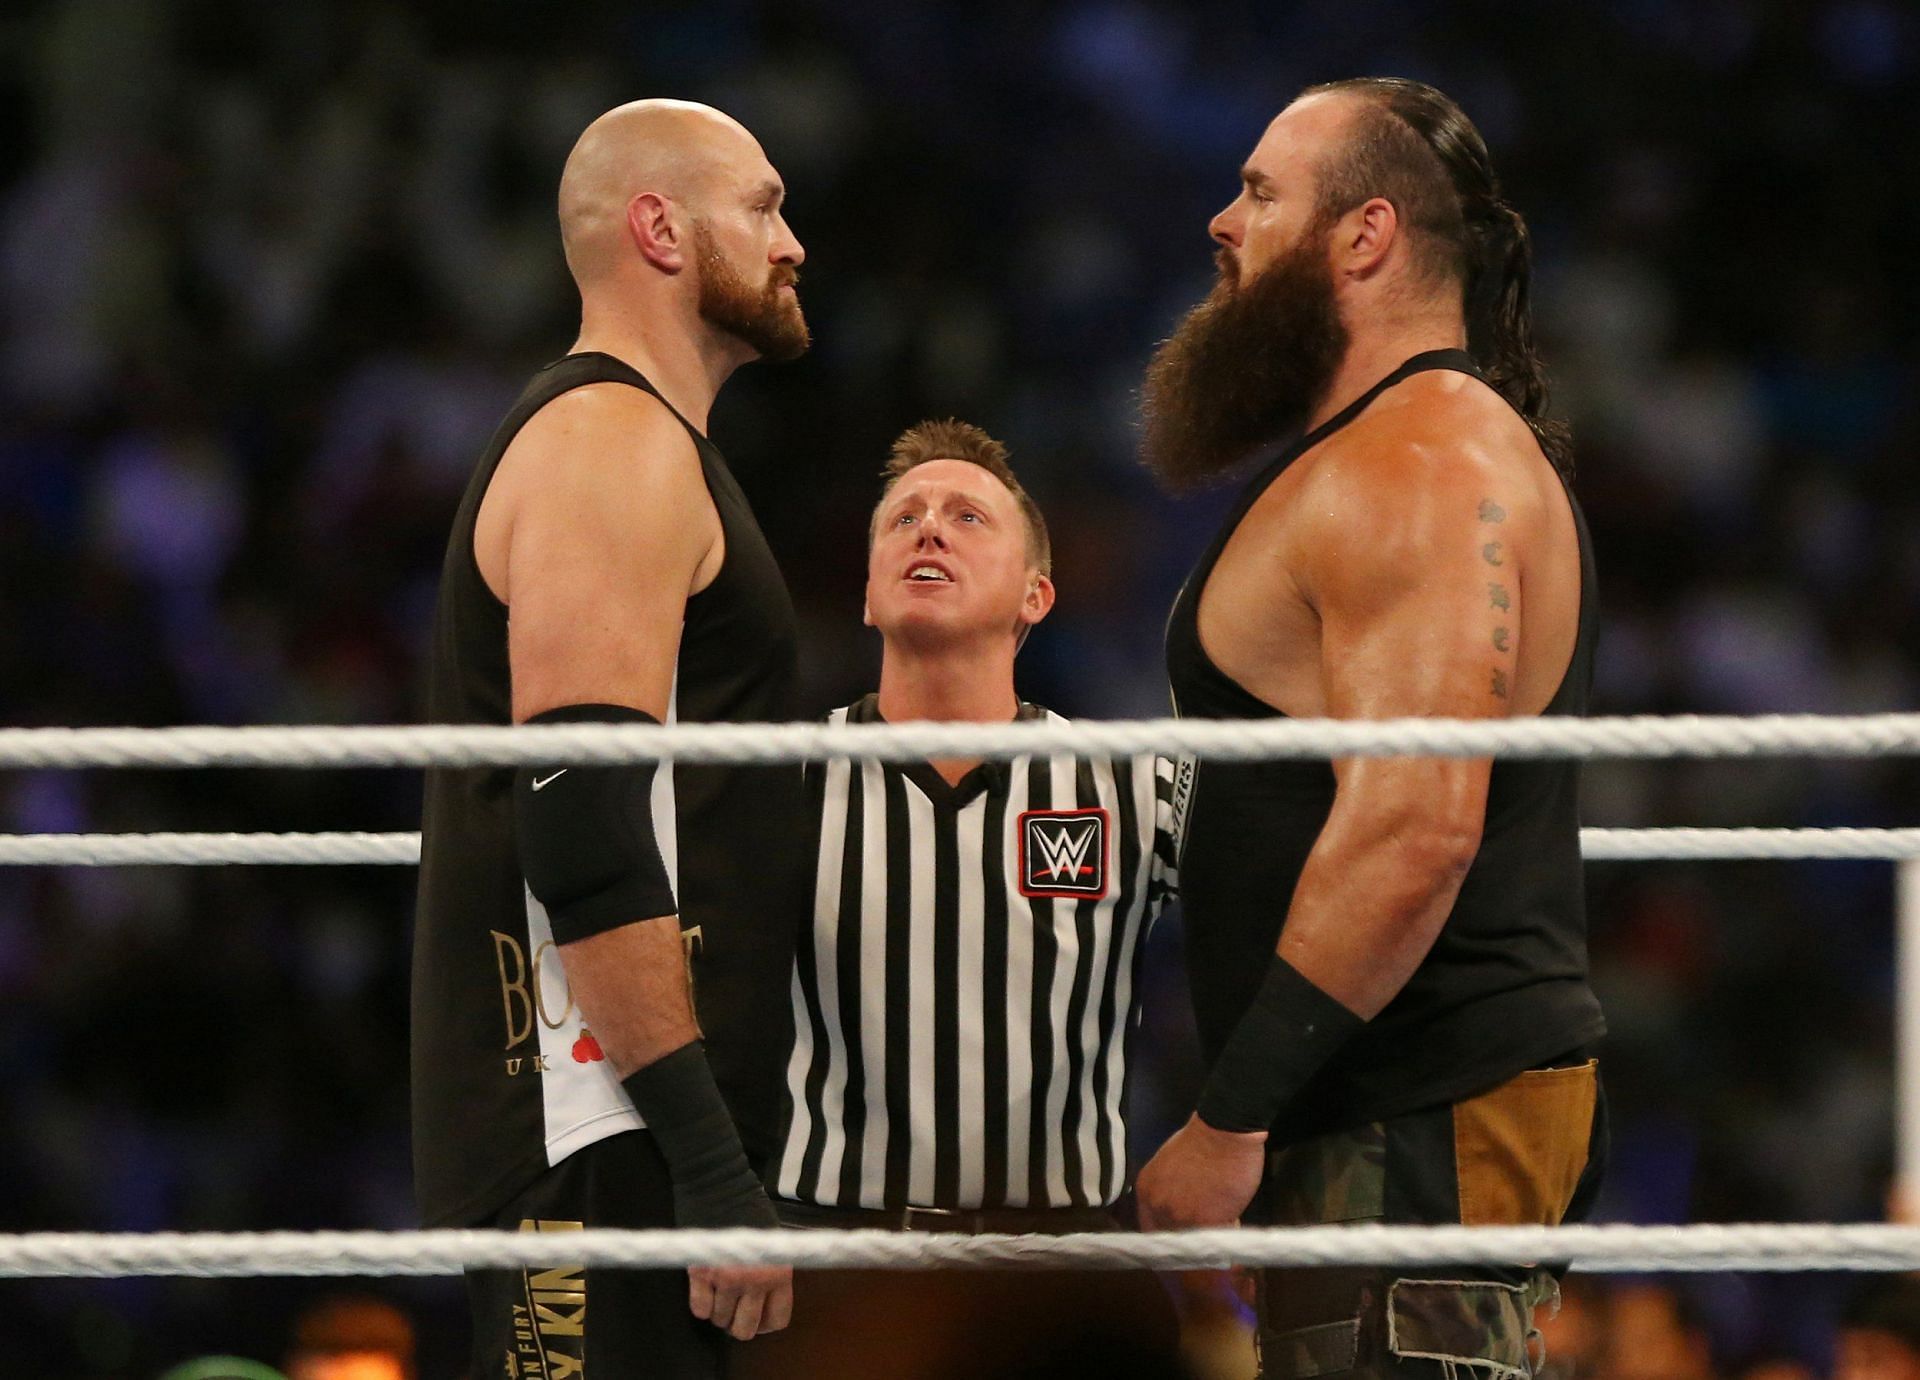 Tyson Fury and Braun Strowman collided in late 2019